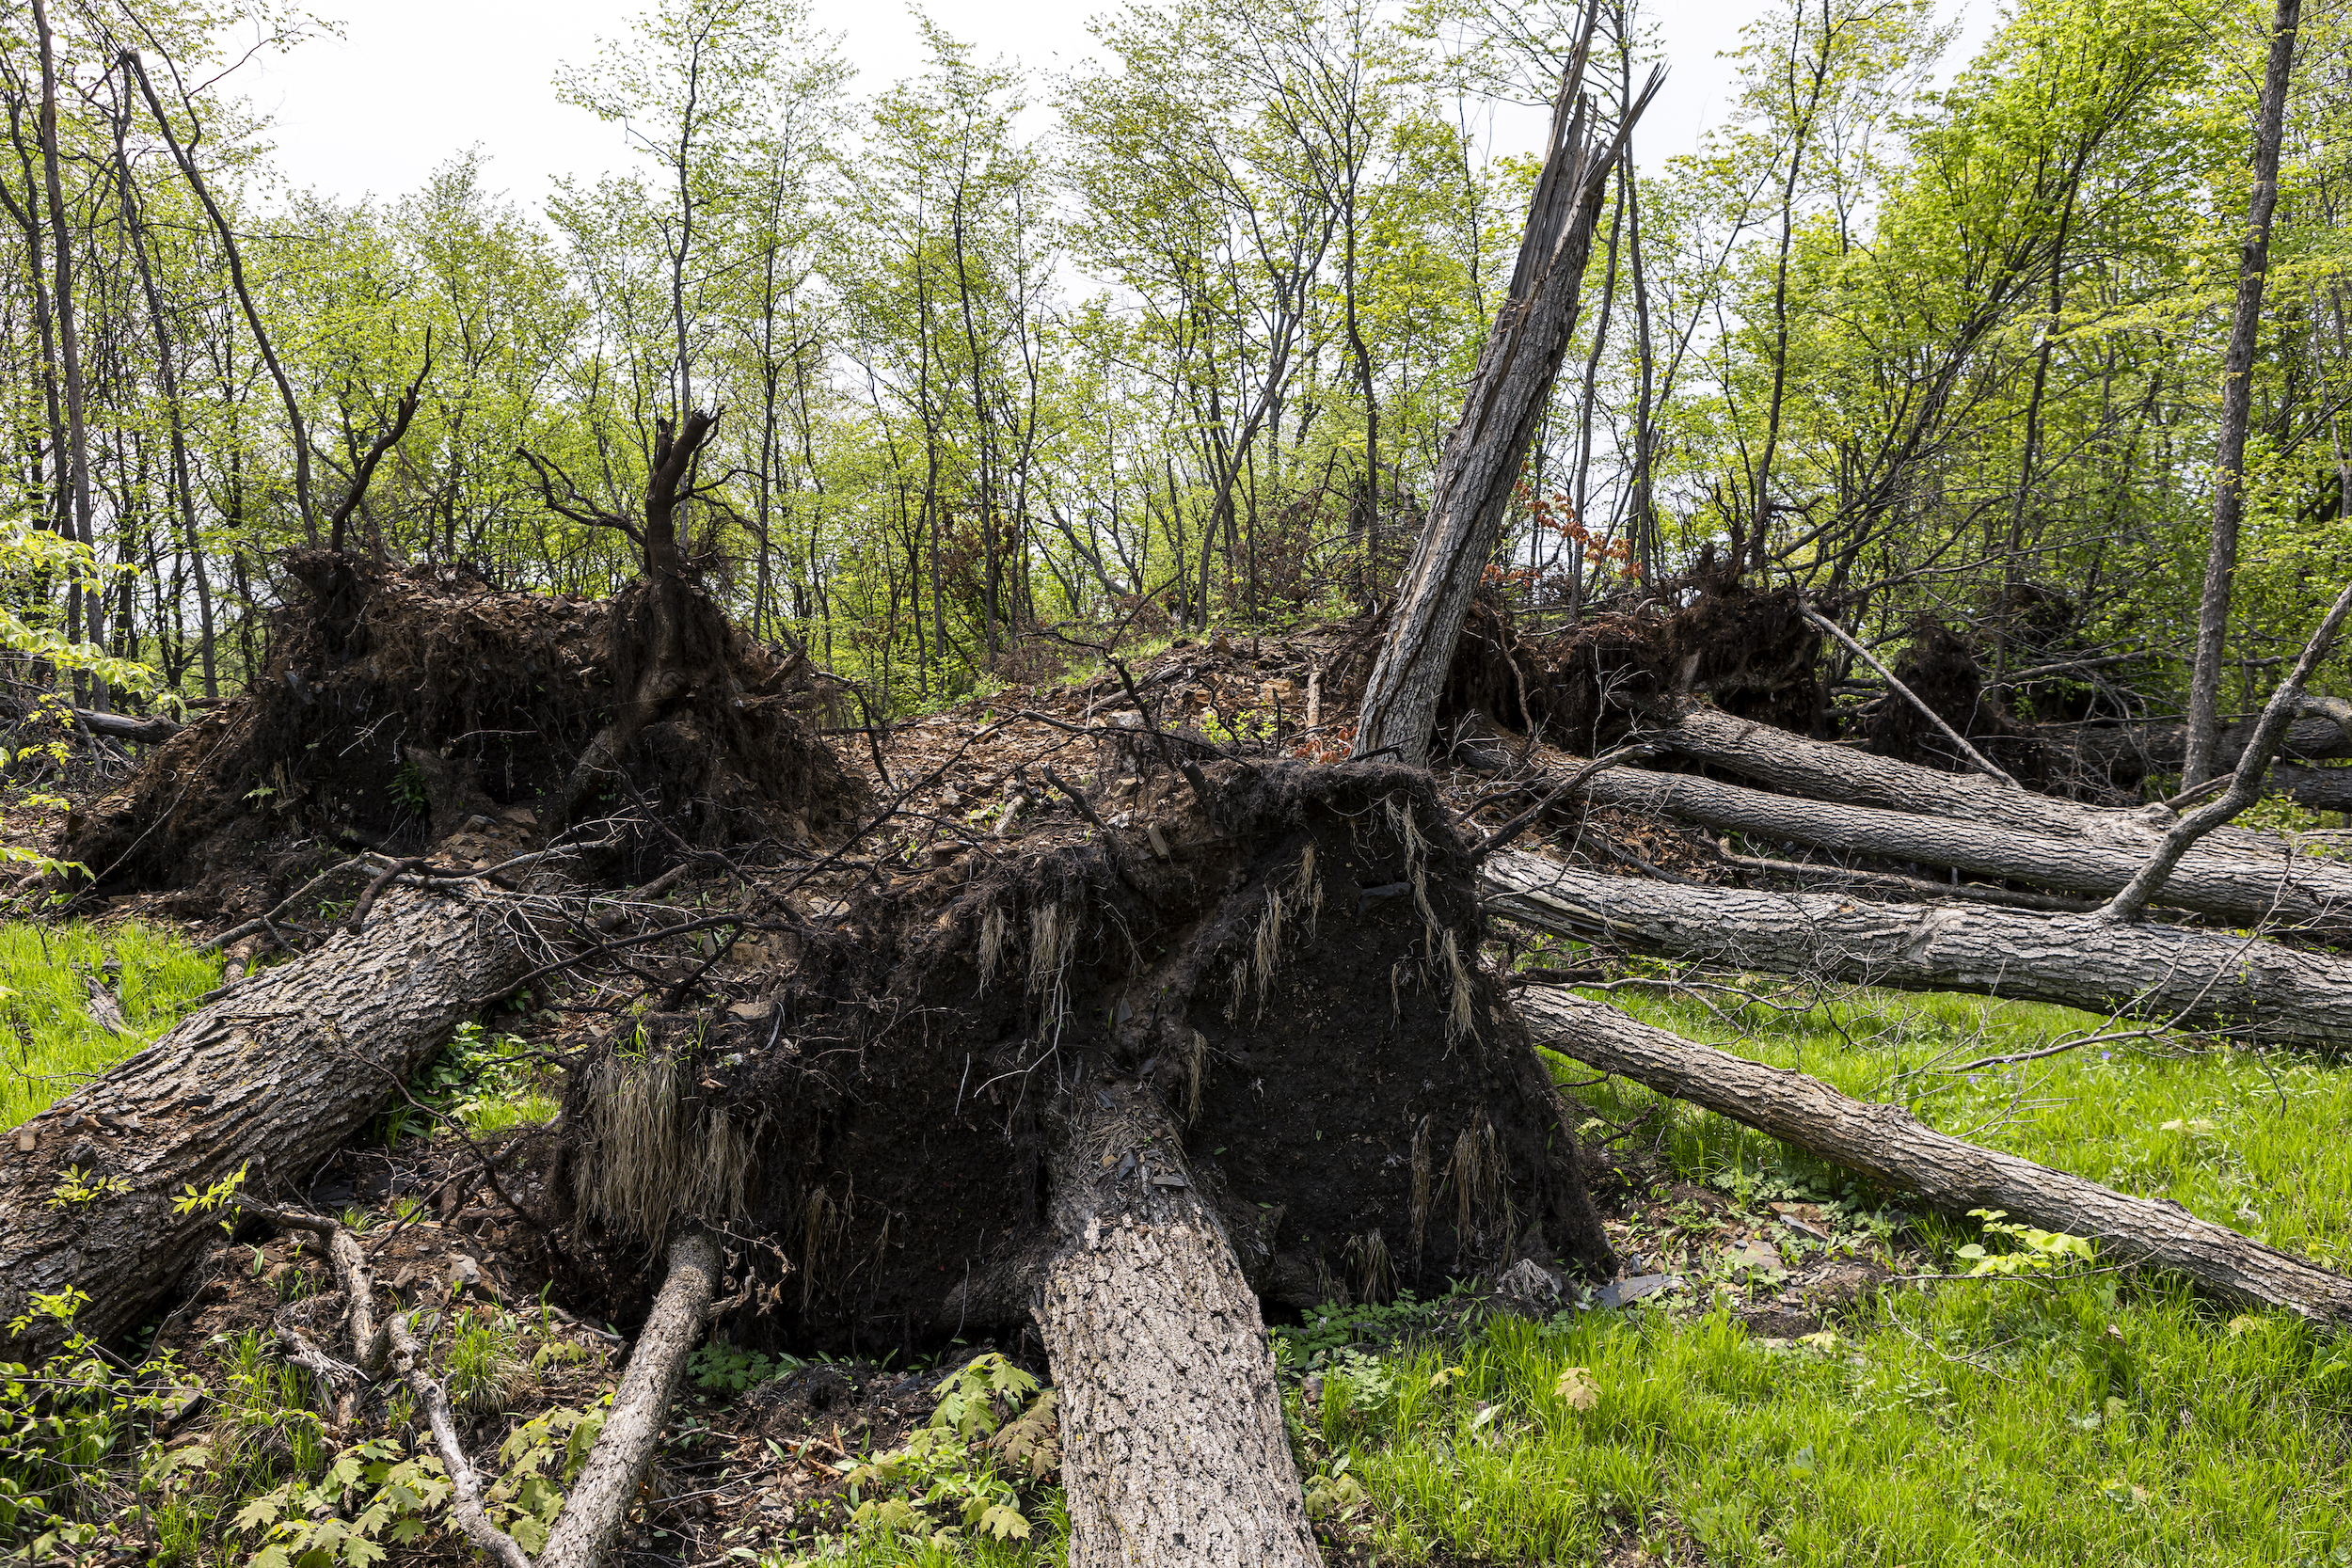 The July 2022 tornado in eastern Ontario shredded a path through the woods where Jacqueline Muccio and her family used to take walks, uprooting massive century-old trees and scattering them around the property like a gigantic game of pick-up sticks.